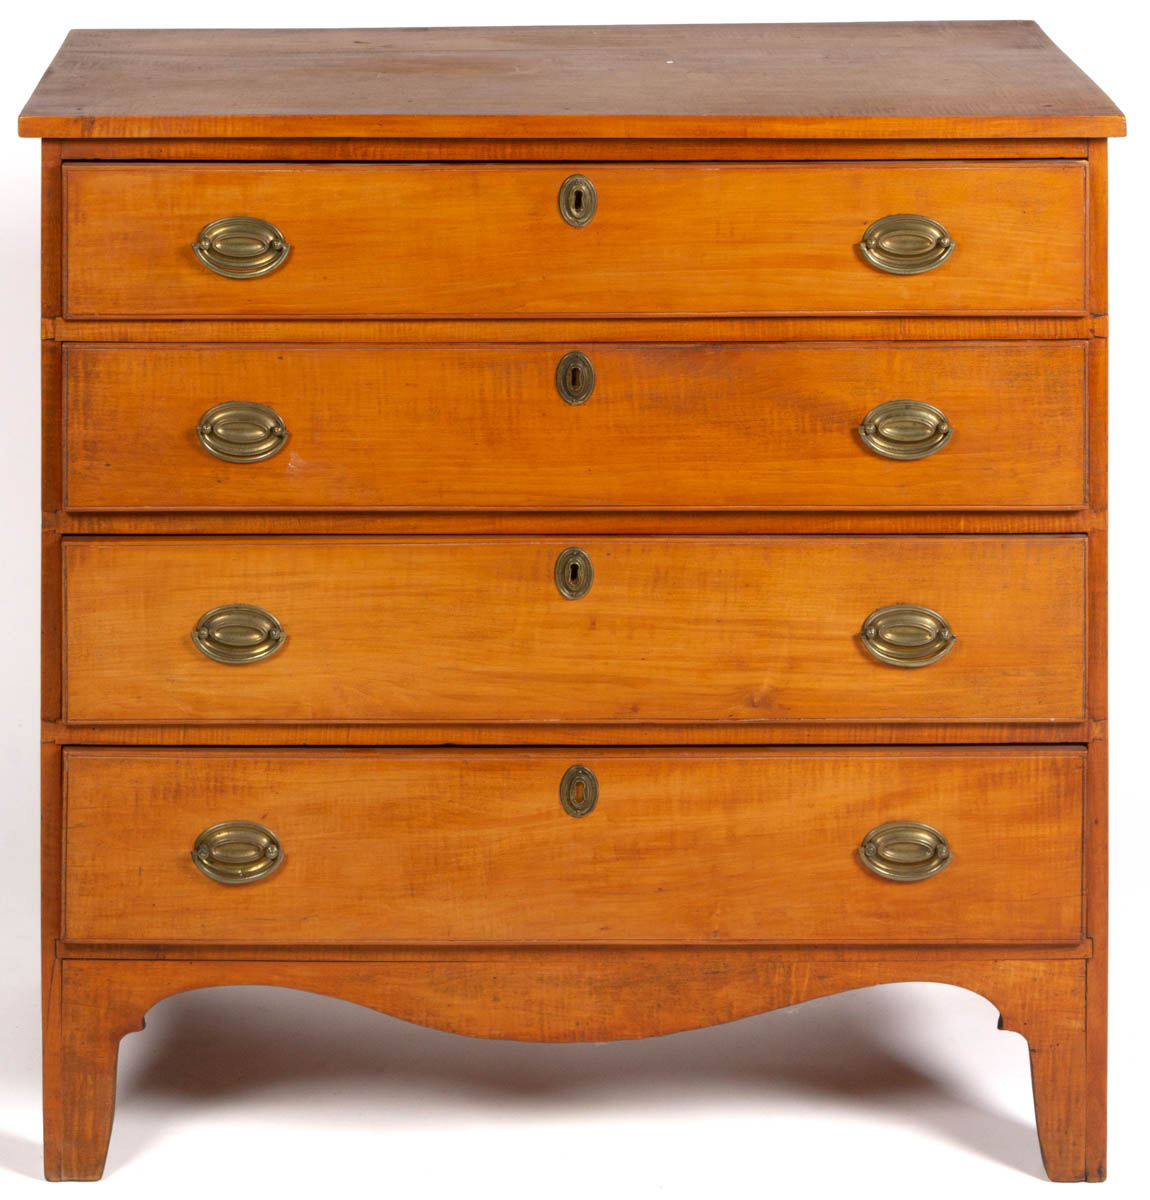 NEW ENGLAND FEDERAL FIGURED MAPLE CHEST OF DRAWERS